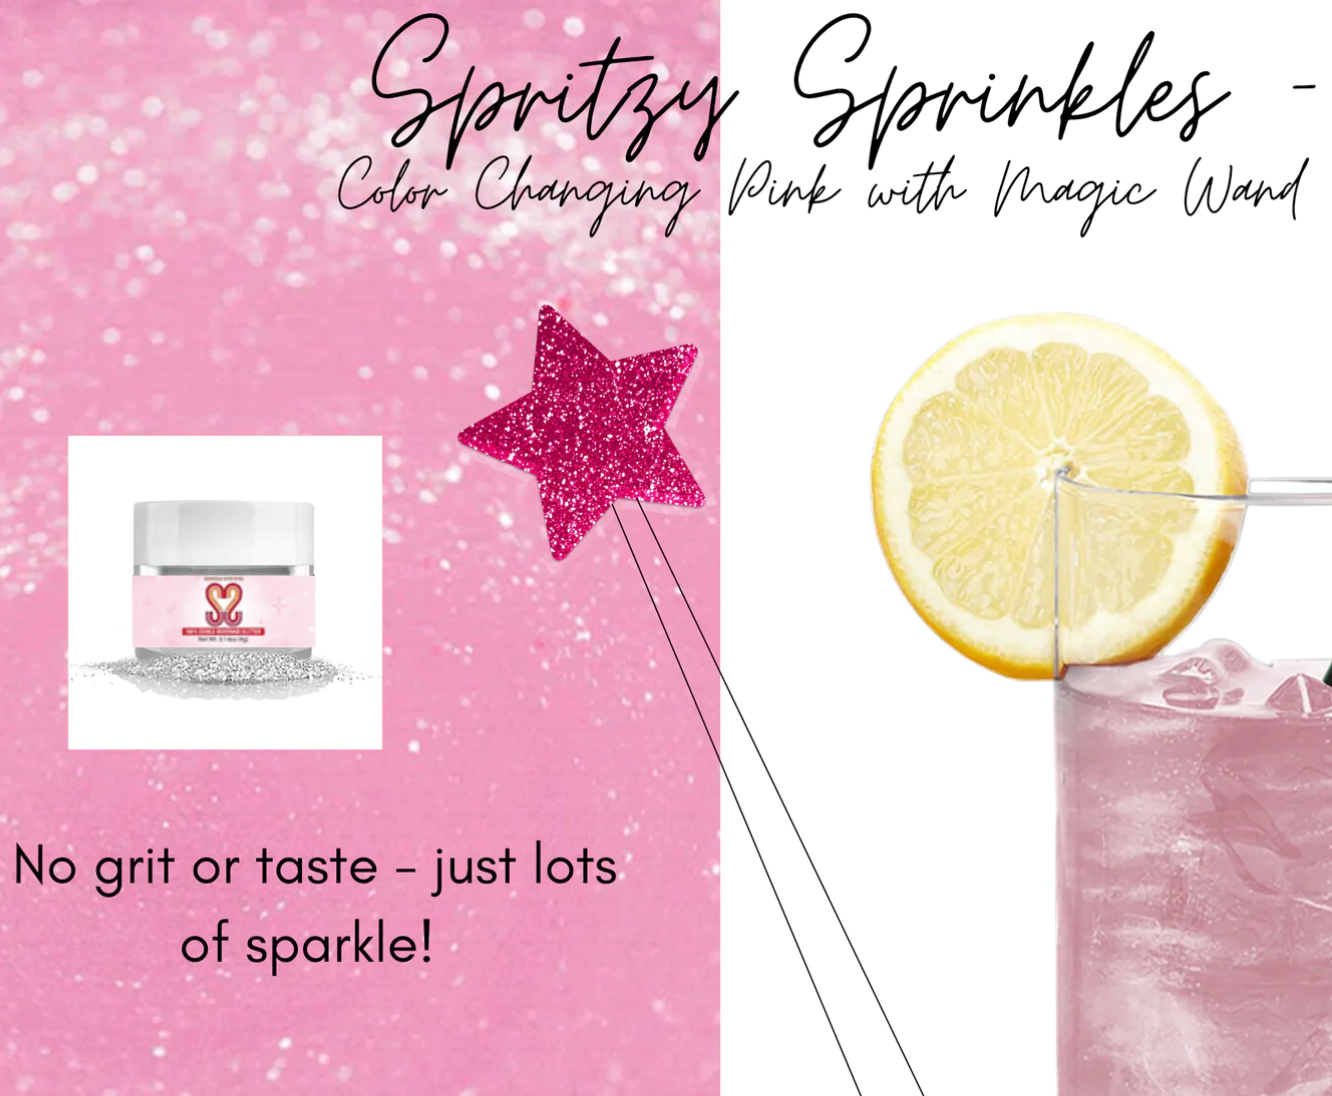 Spritzy Sprinkles with Wand Gift Set